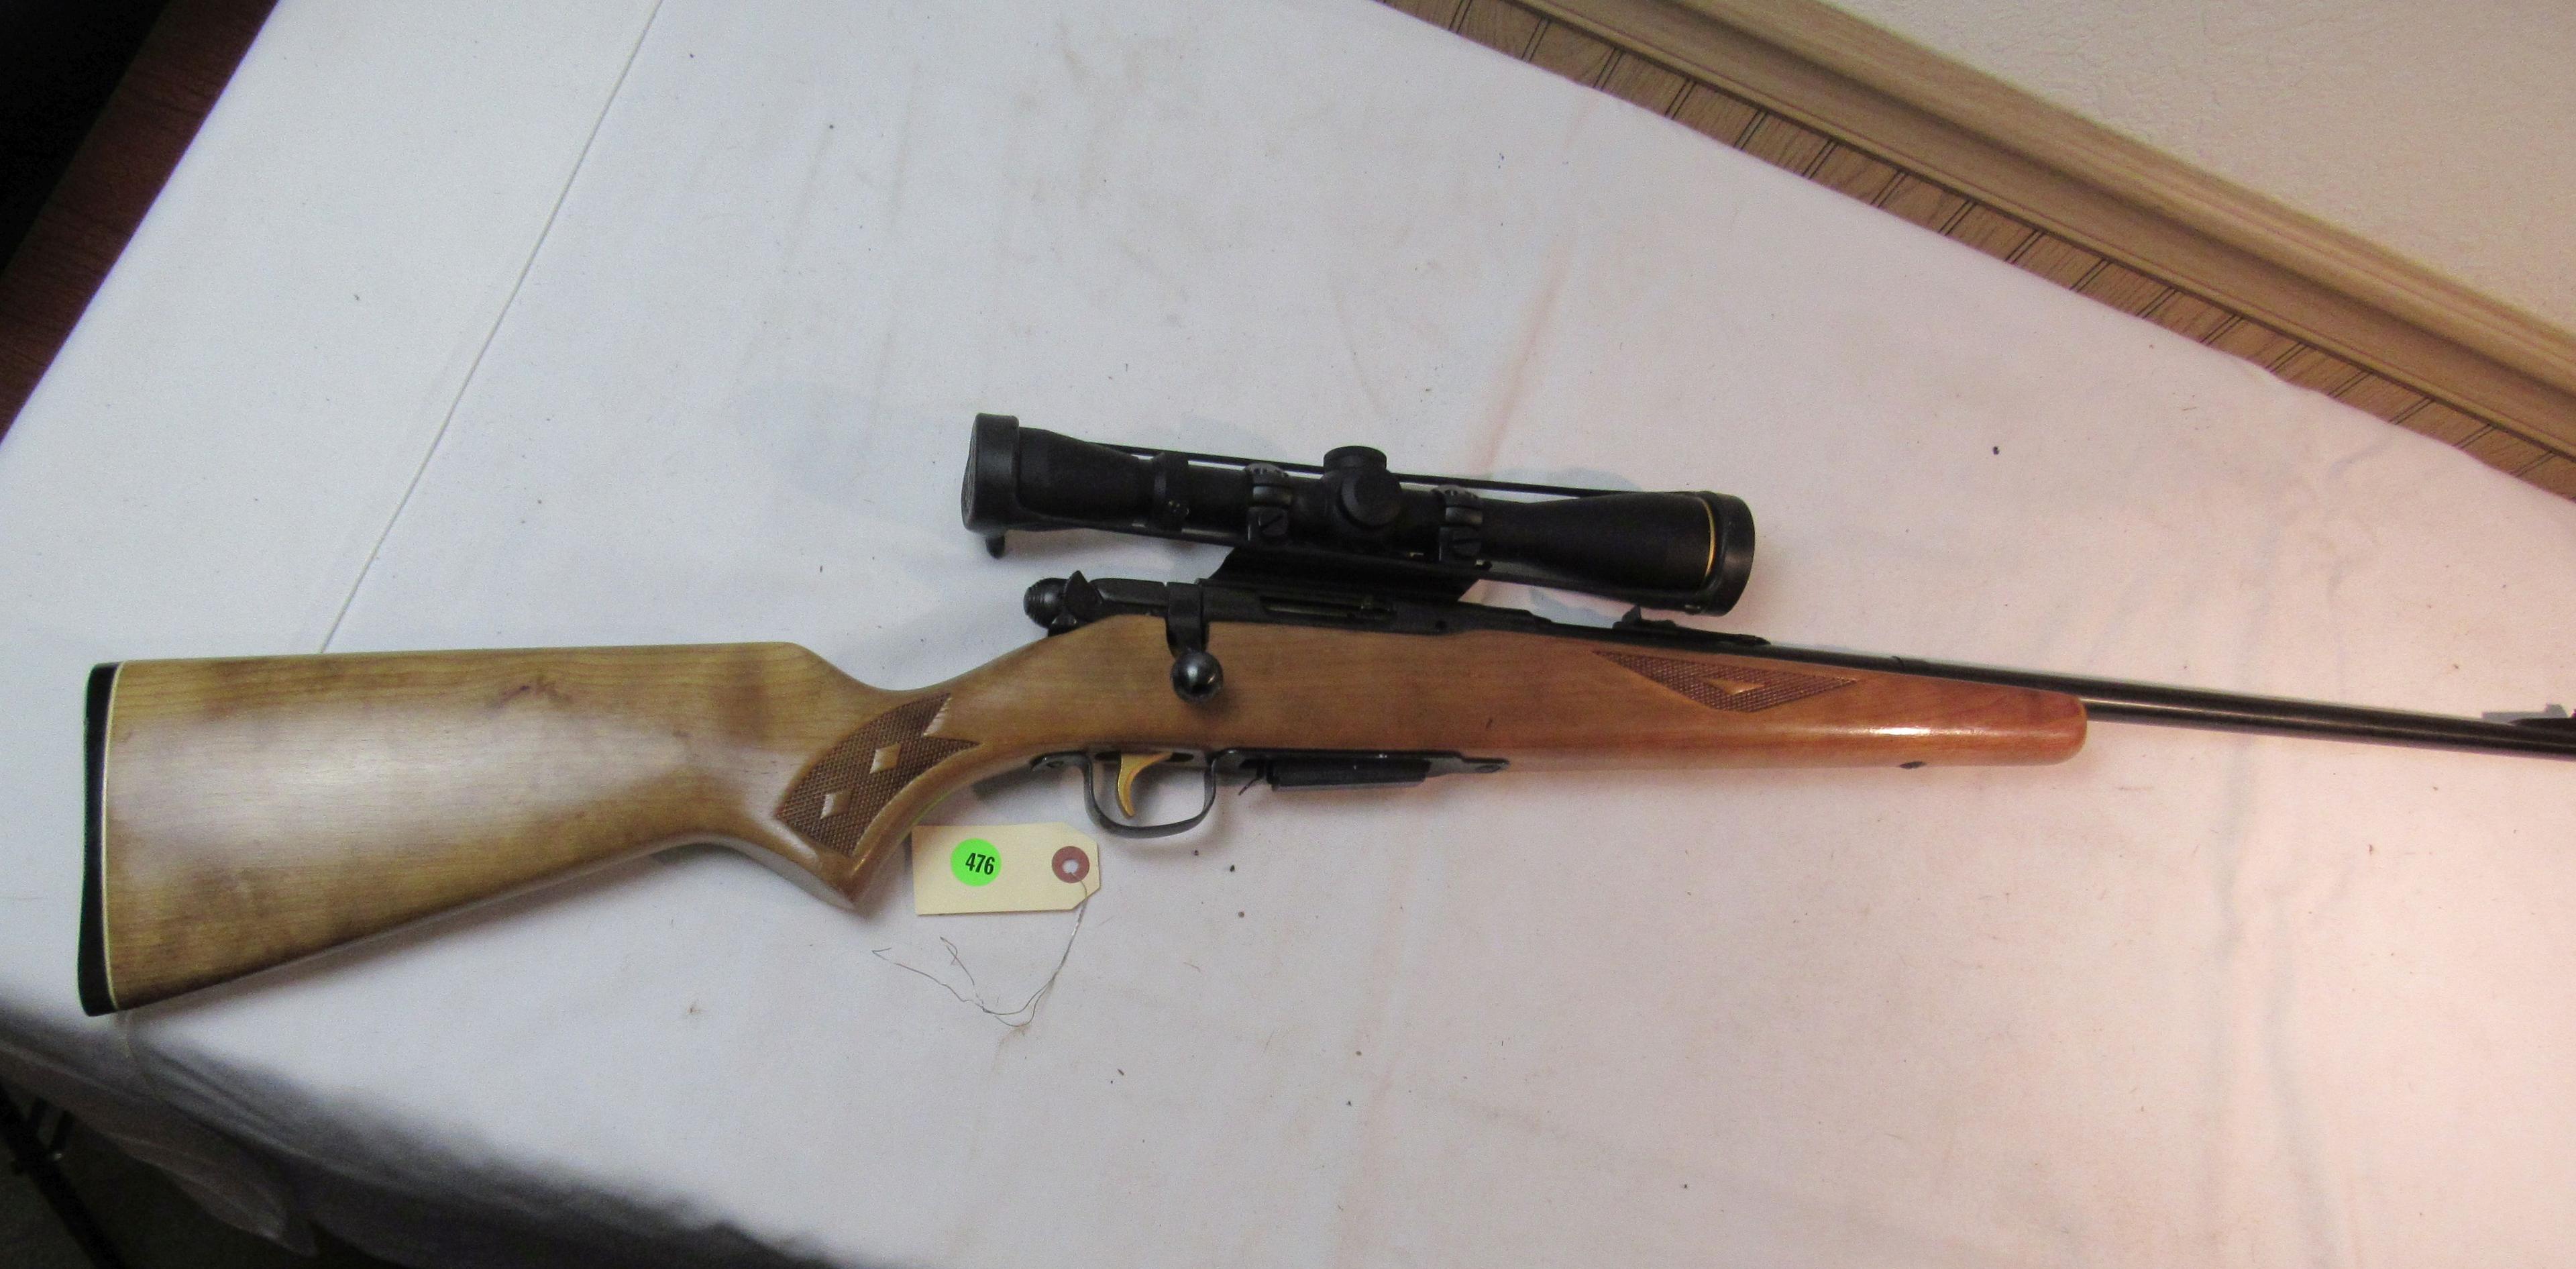 Savage Arms 22 cal bolt action rifle model # 6400 (magazine included) with 40mm scope model #114164